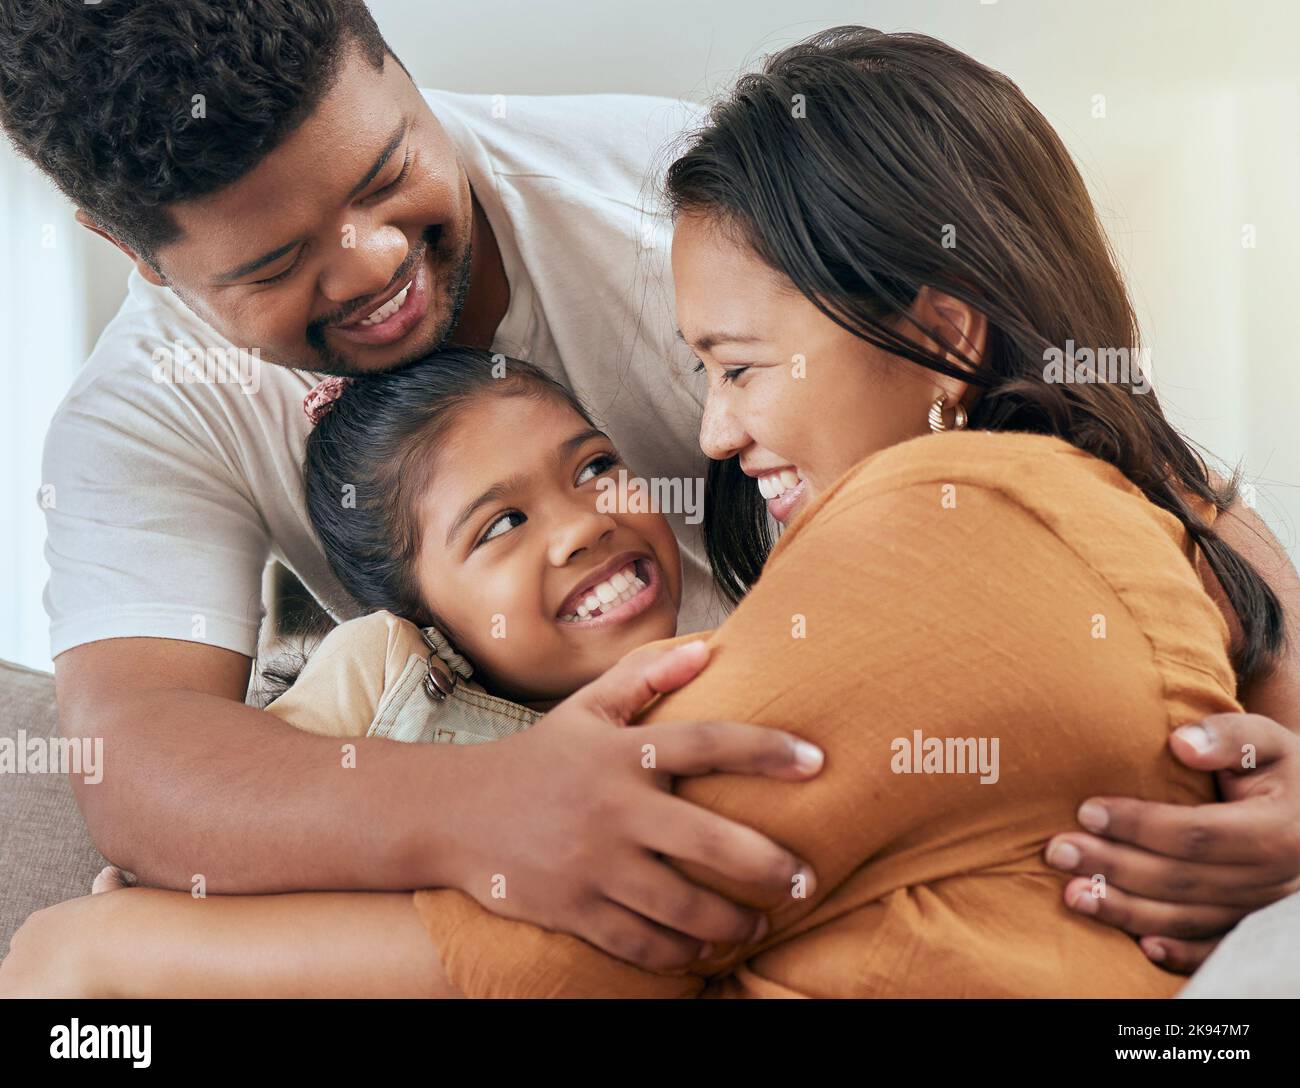 Asian family, parents and child hug on sofa bonding, love and affection in family home. Indian father, mother and girl relax together loving embrace Stock Photo